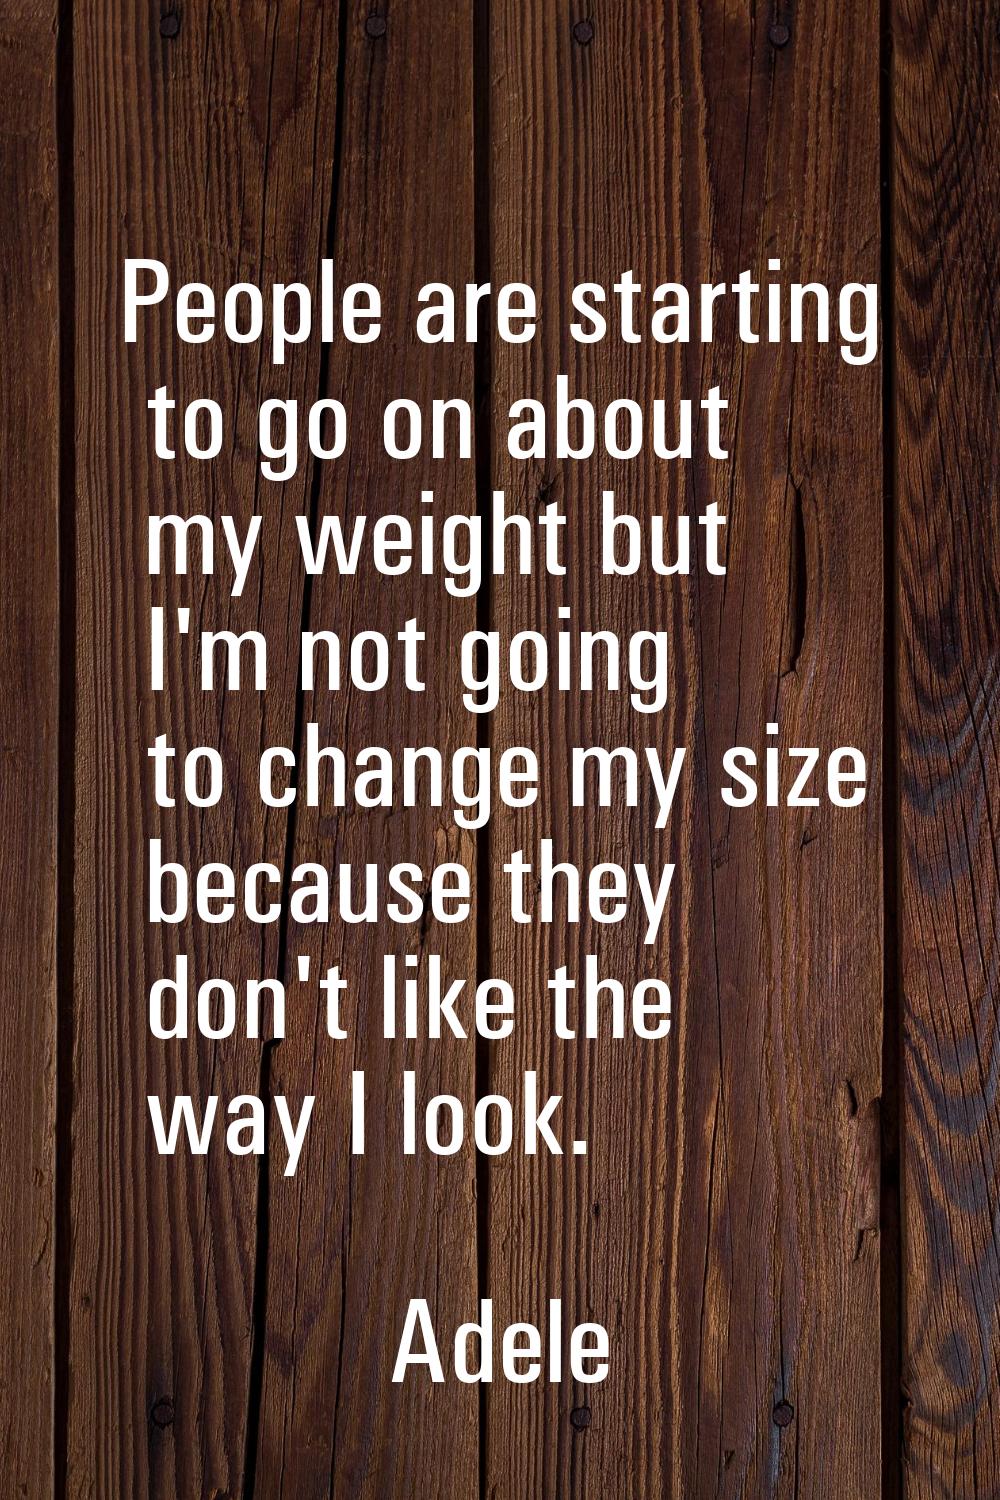 People are starting to go on about my weight but I'm not going to change my size because they don't